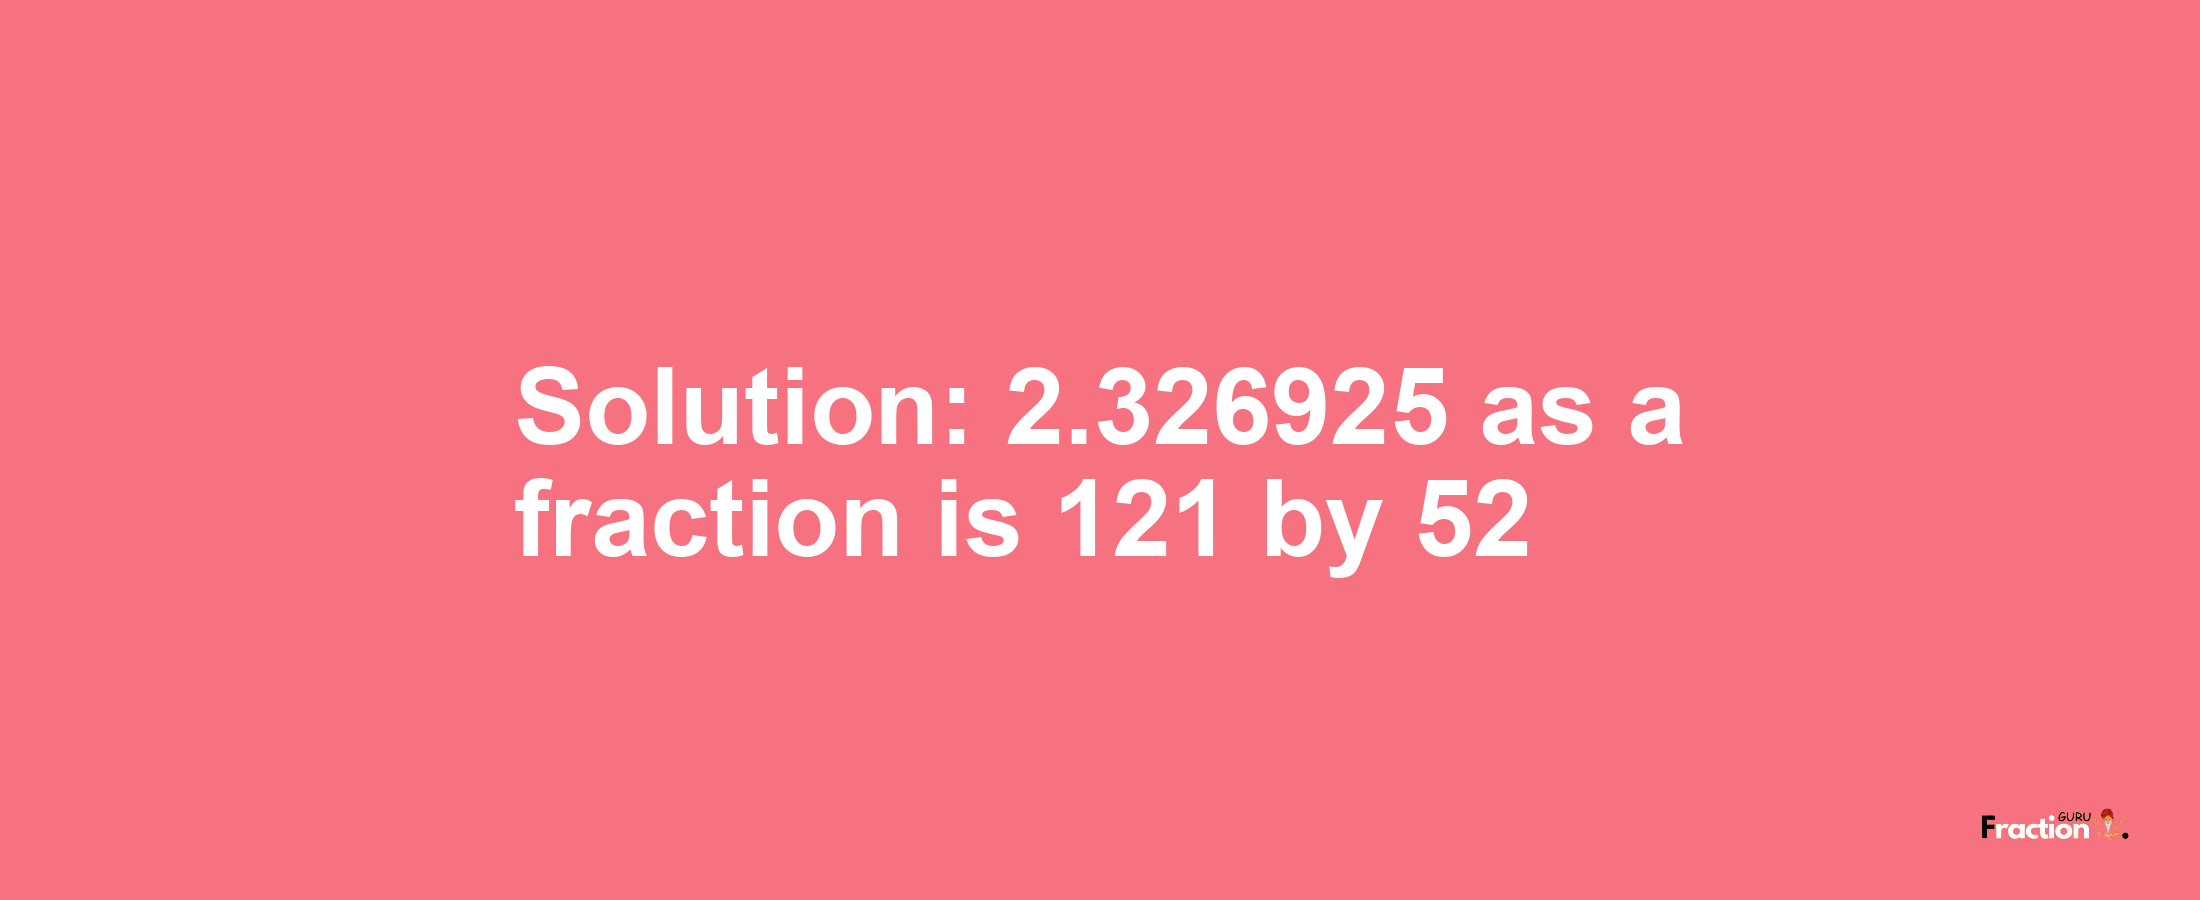 Solution:2.326925 as a fraction is 121/52